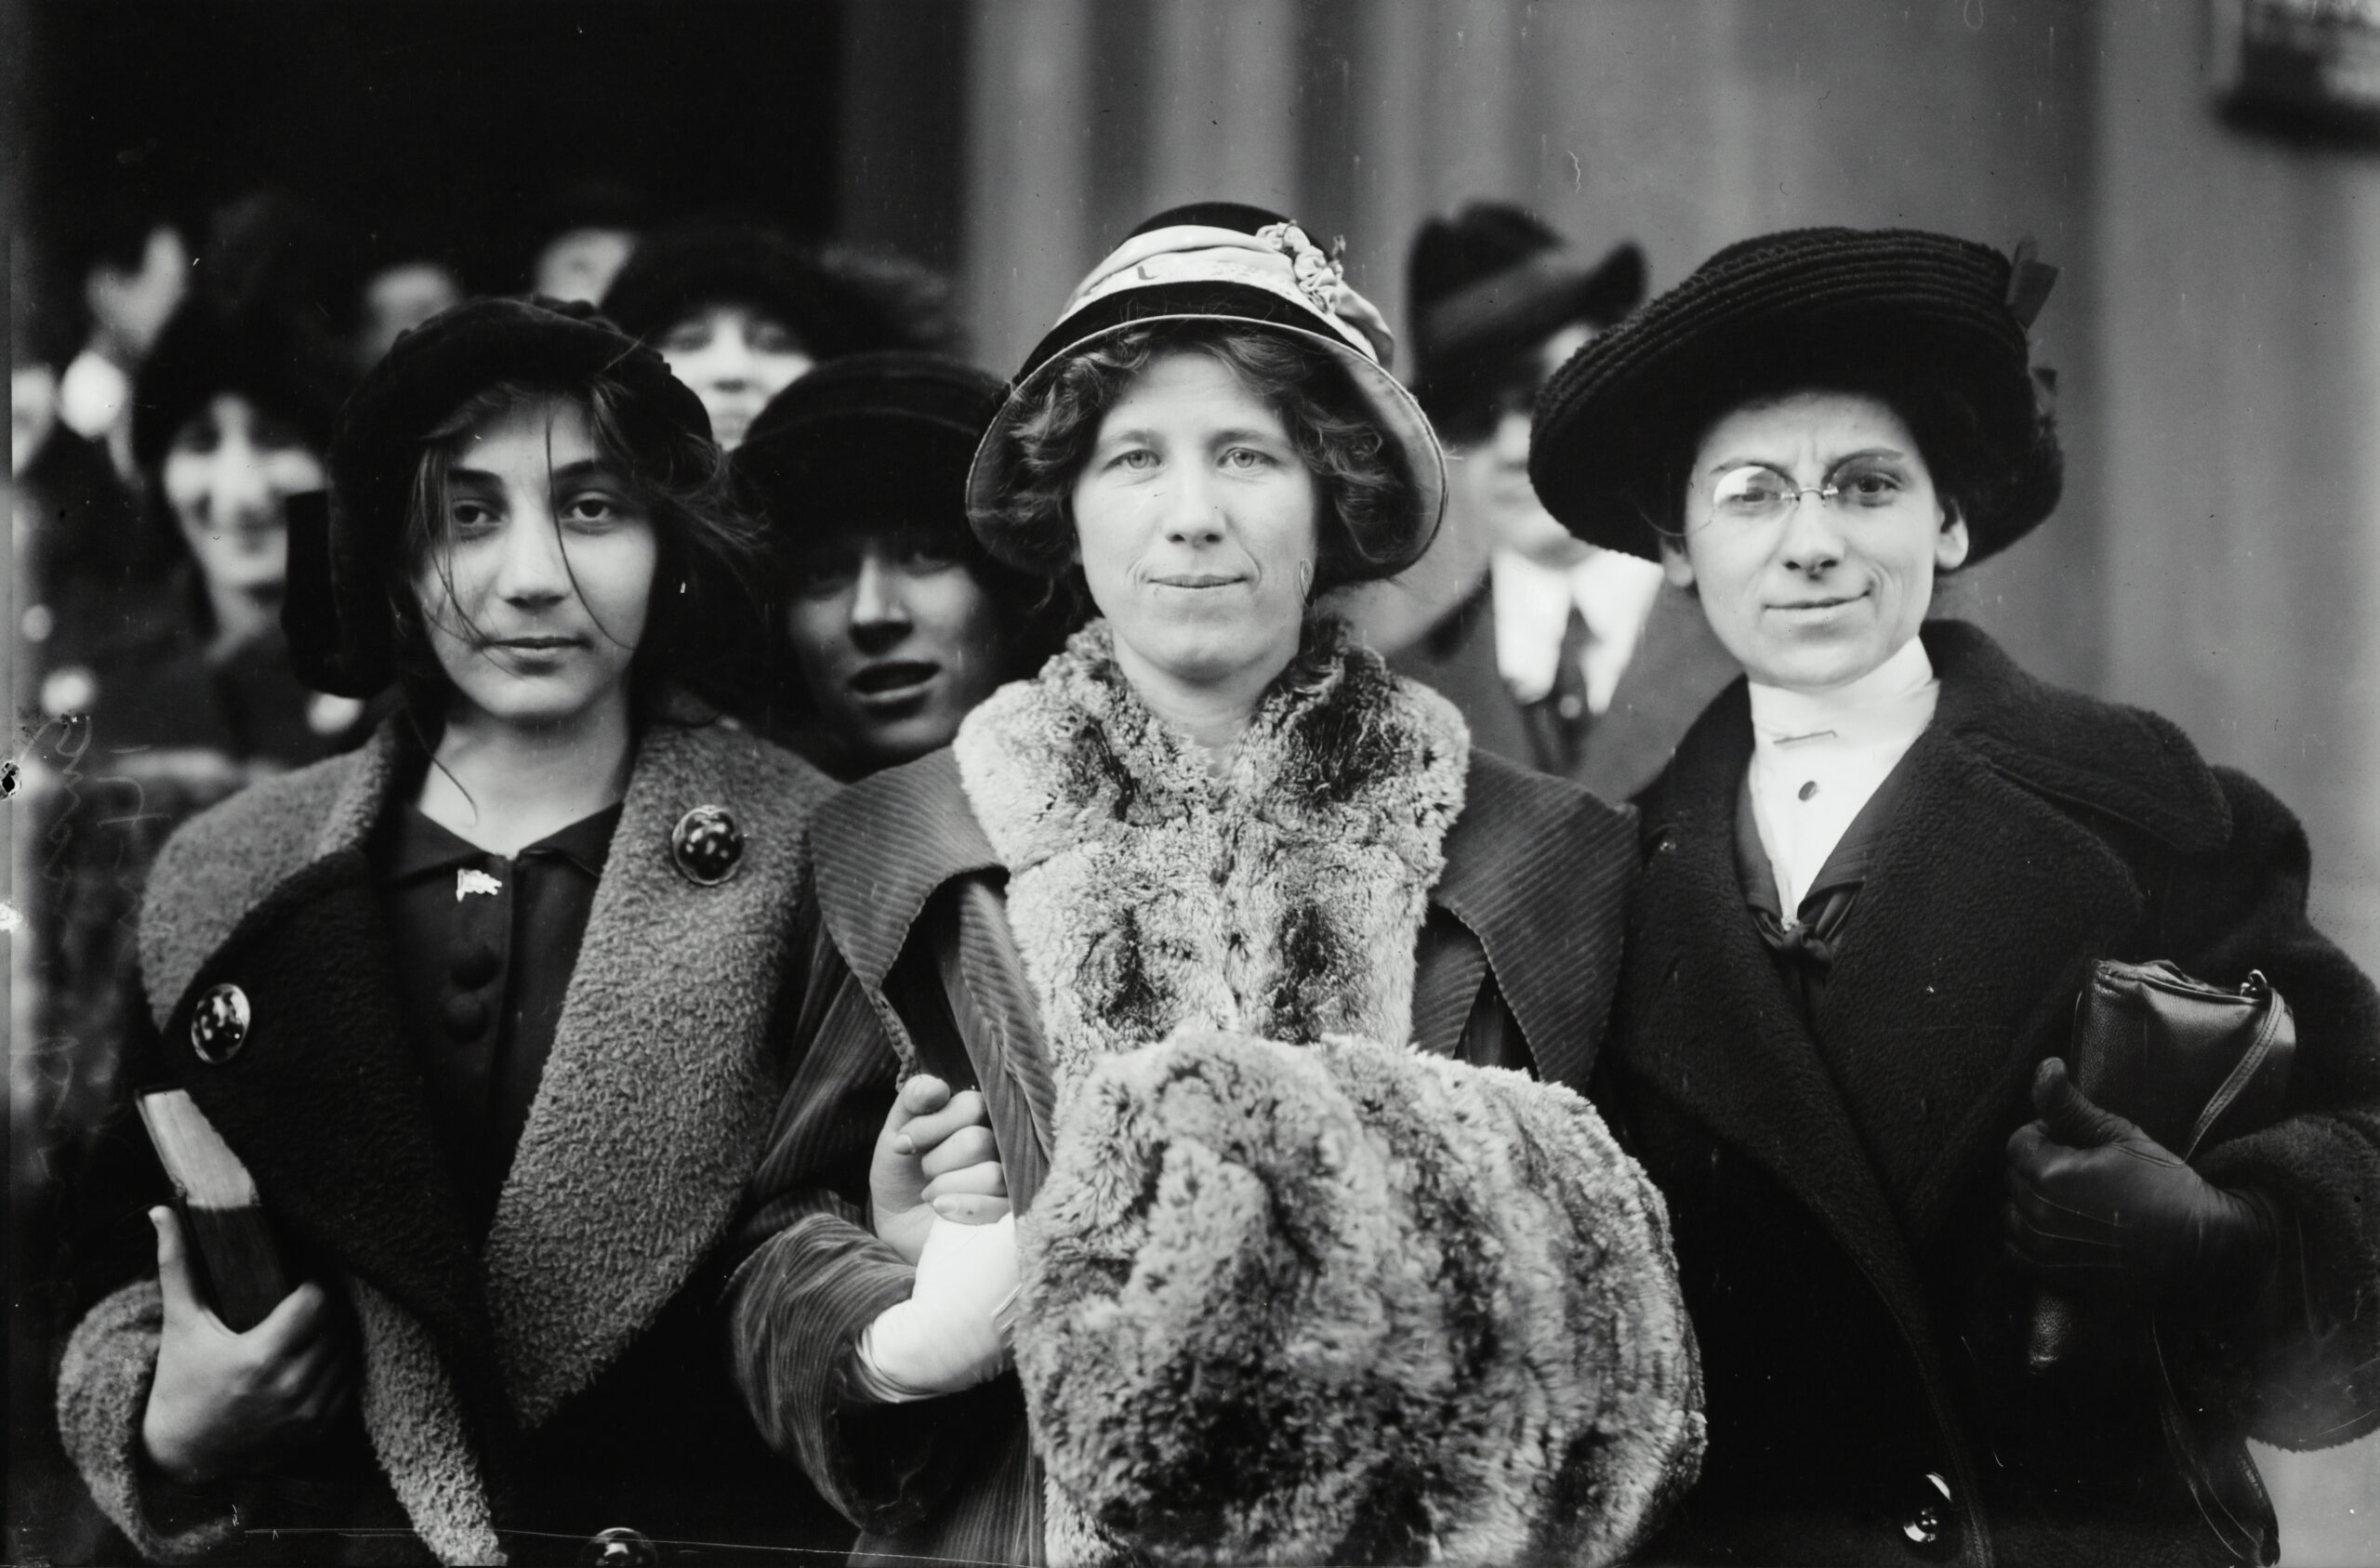 Three women strikers in the 1900s, stories included in the Women's History Month Reading List